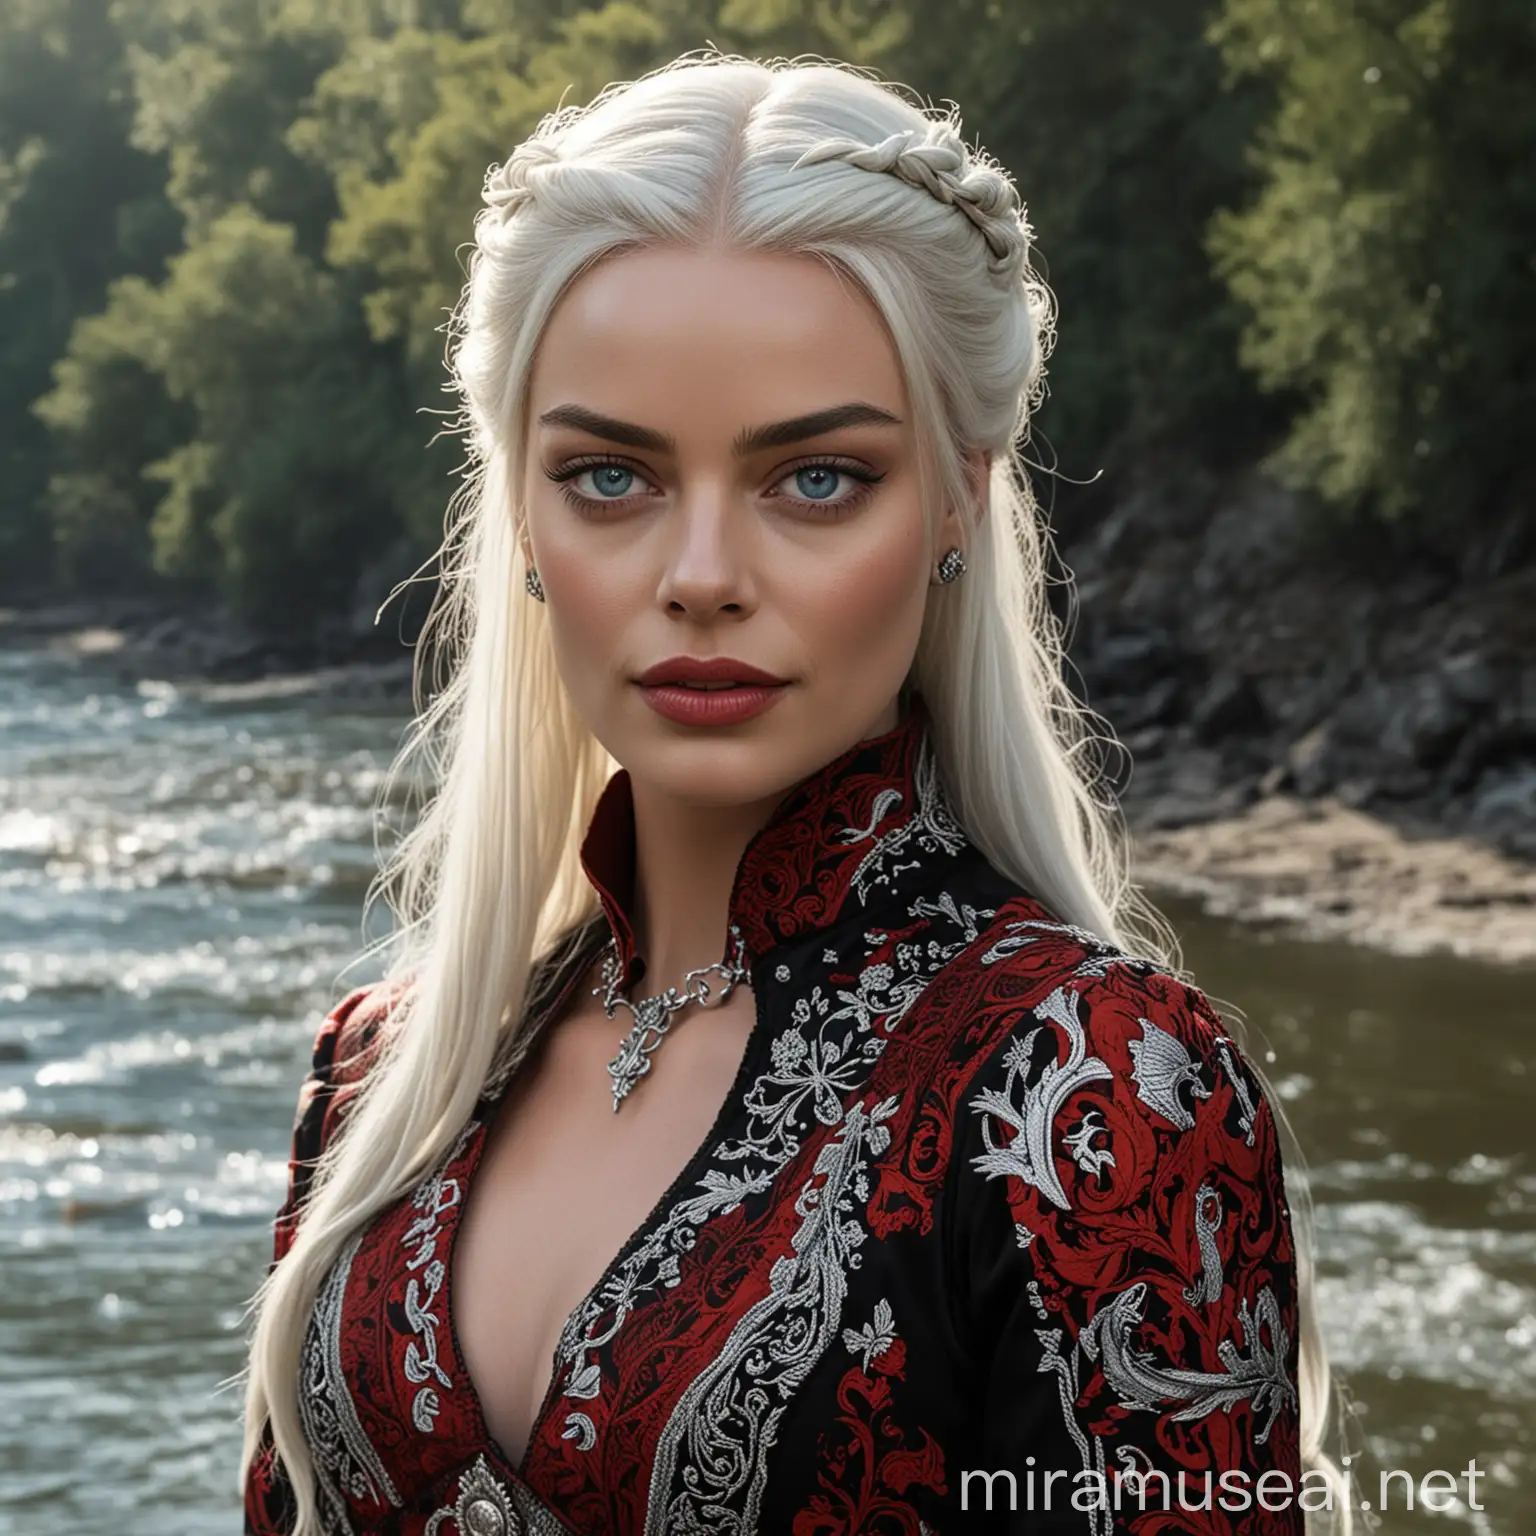 Margot Robbie as Targaryen Princess Ethereal Beauty by the Sunny River